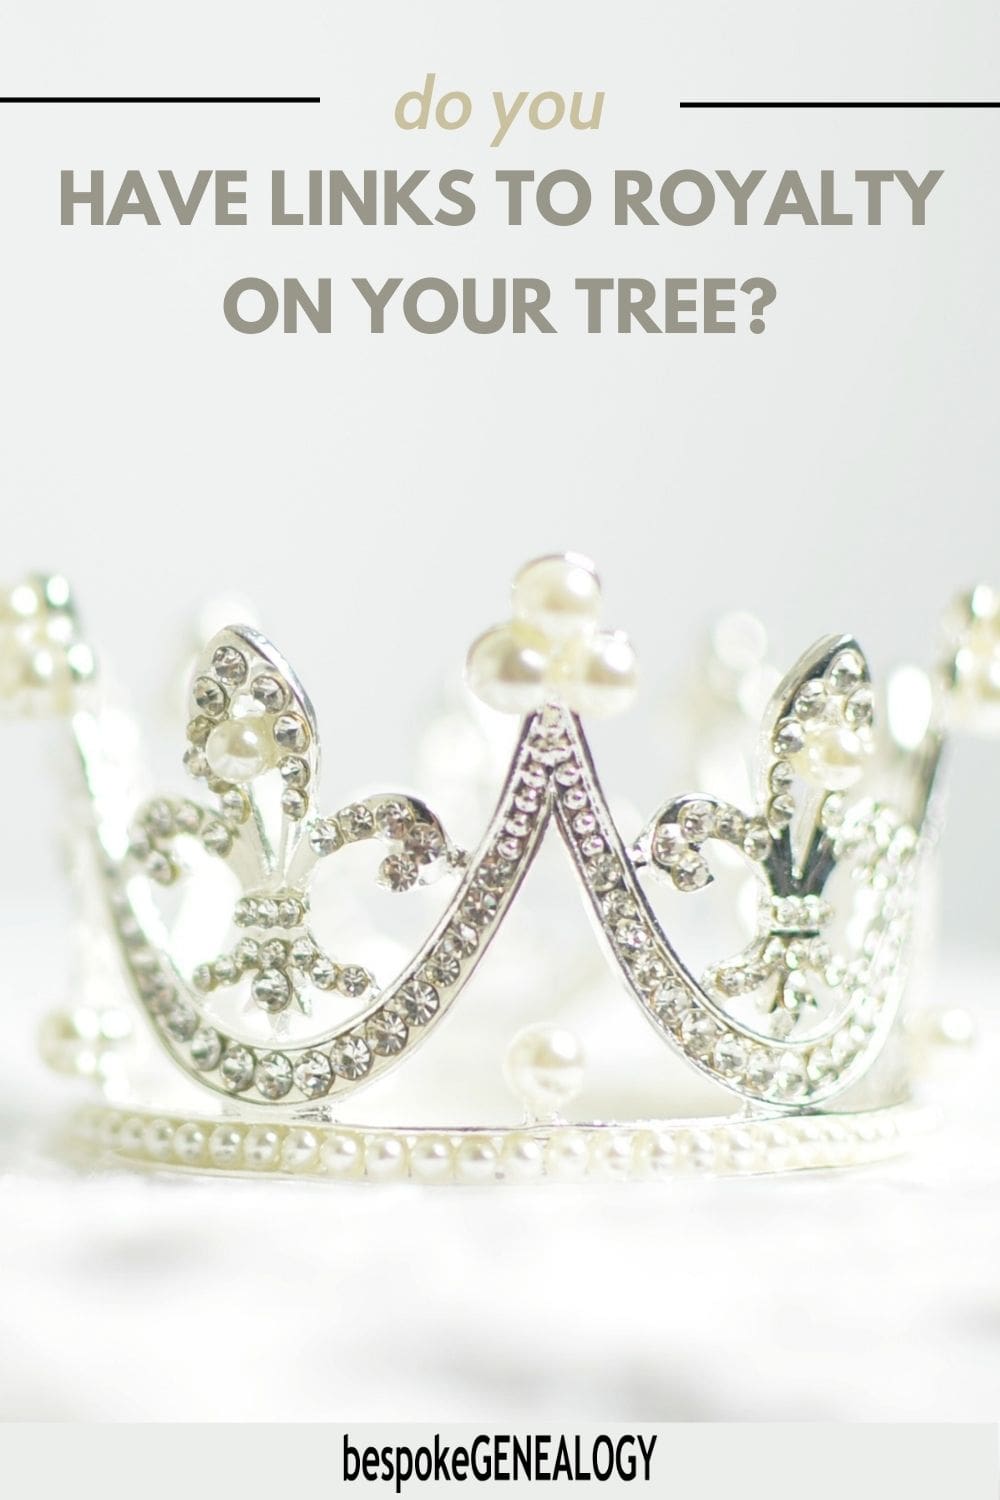 Do you have links to Royalty on your tree. Close up photo of a crown.